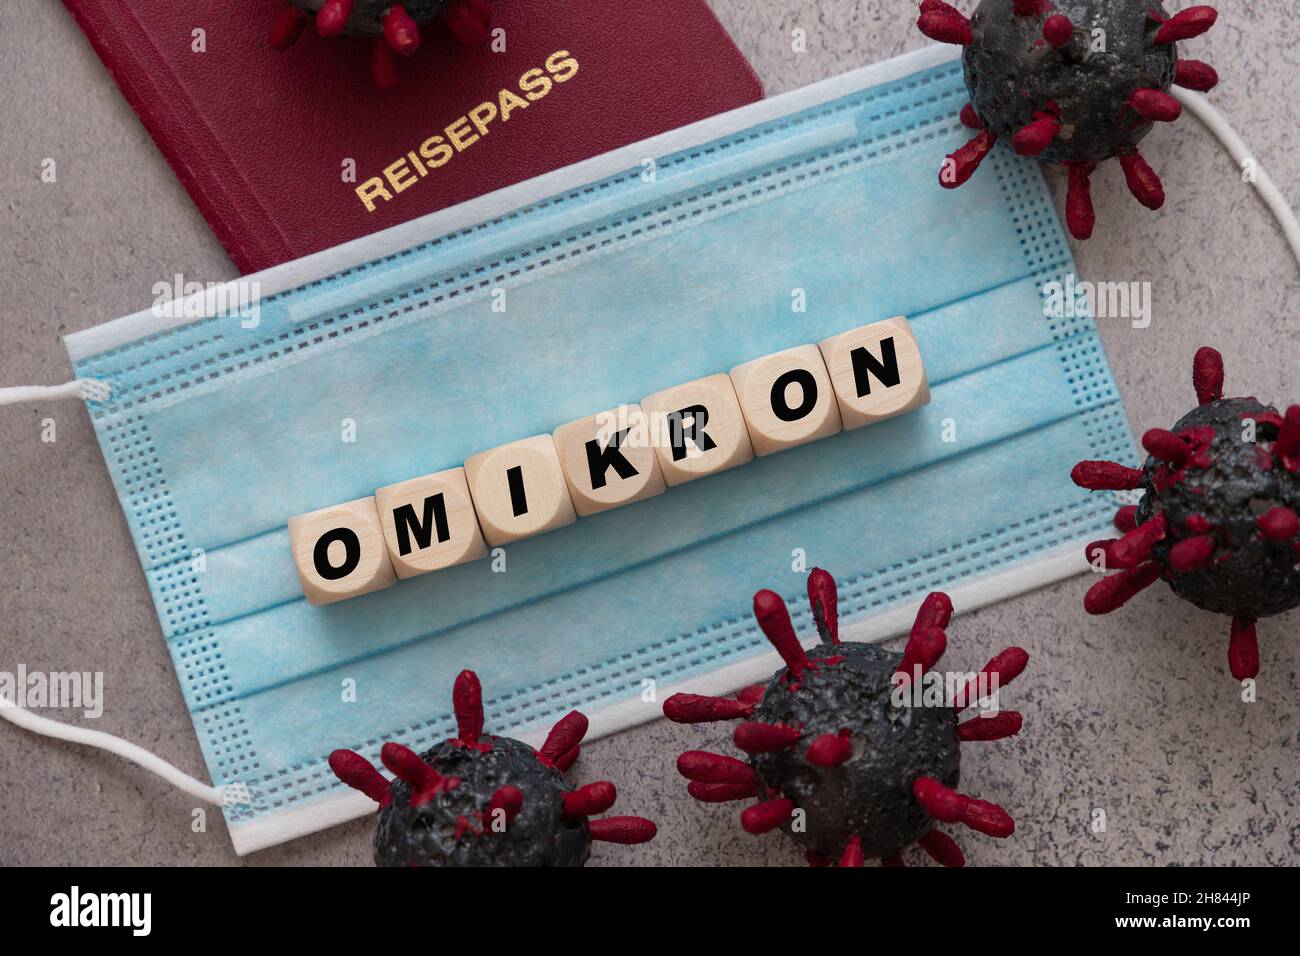 Omikron is the new type of corona virus from South Africa, marked as B.1.1.529 Stock Photo